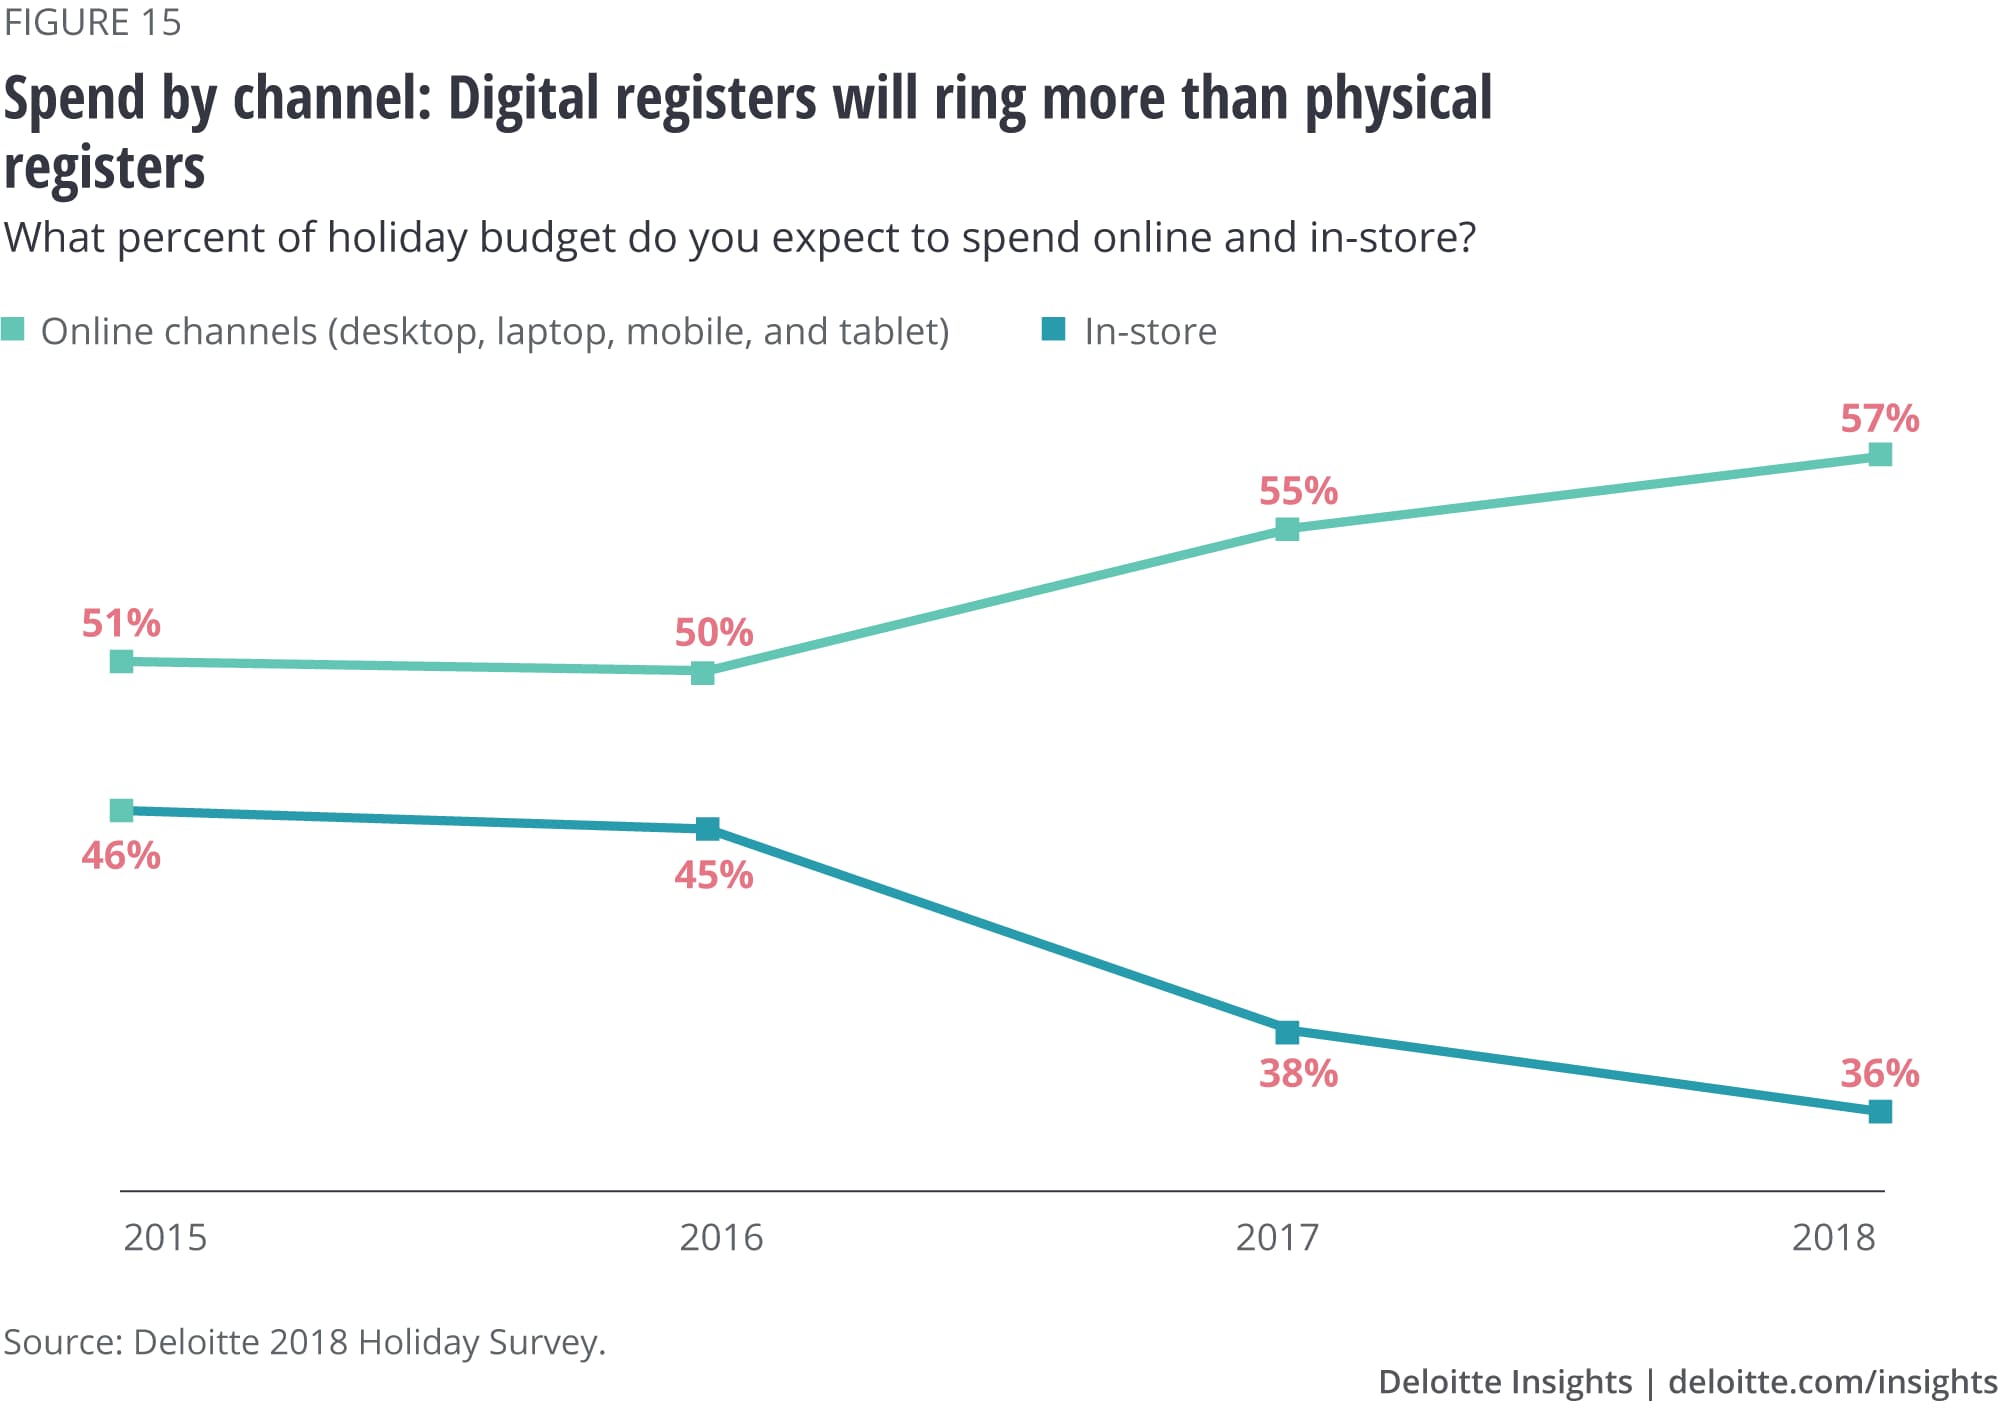 Spend by channel: Digital registers will ring more than physical registers